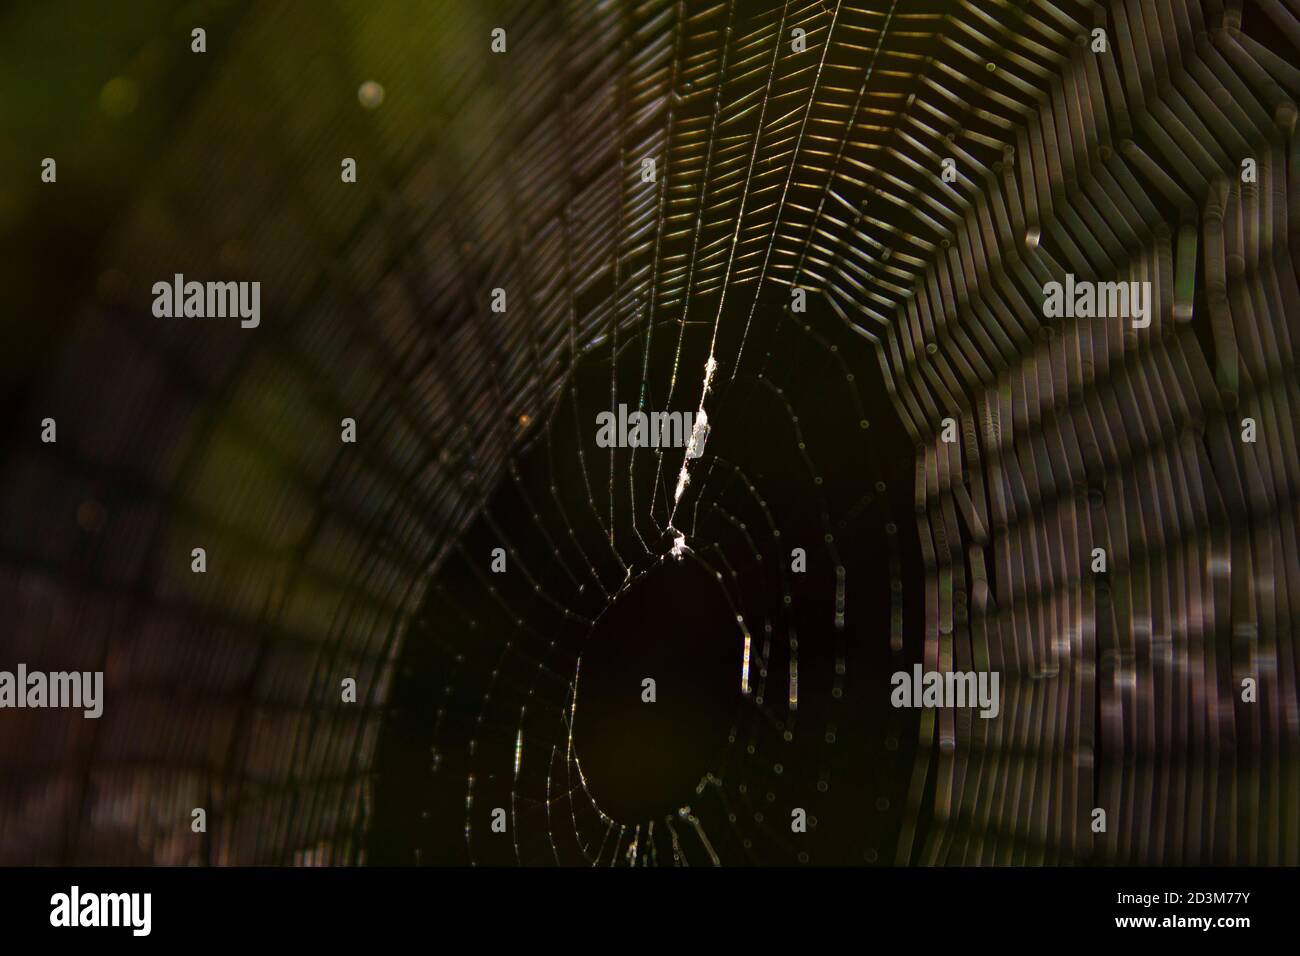 Closeup veiw of a spider web with great color and a black background. Stock Photo